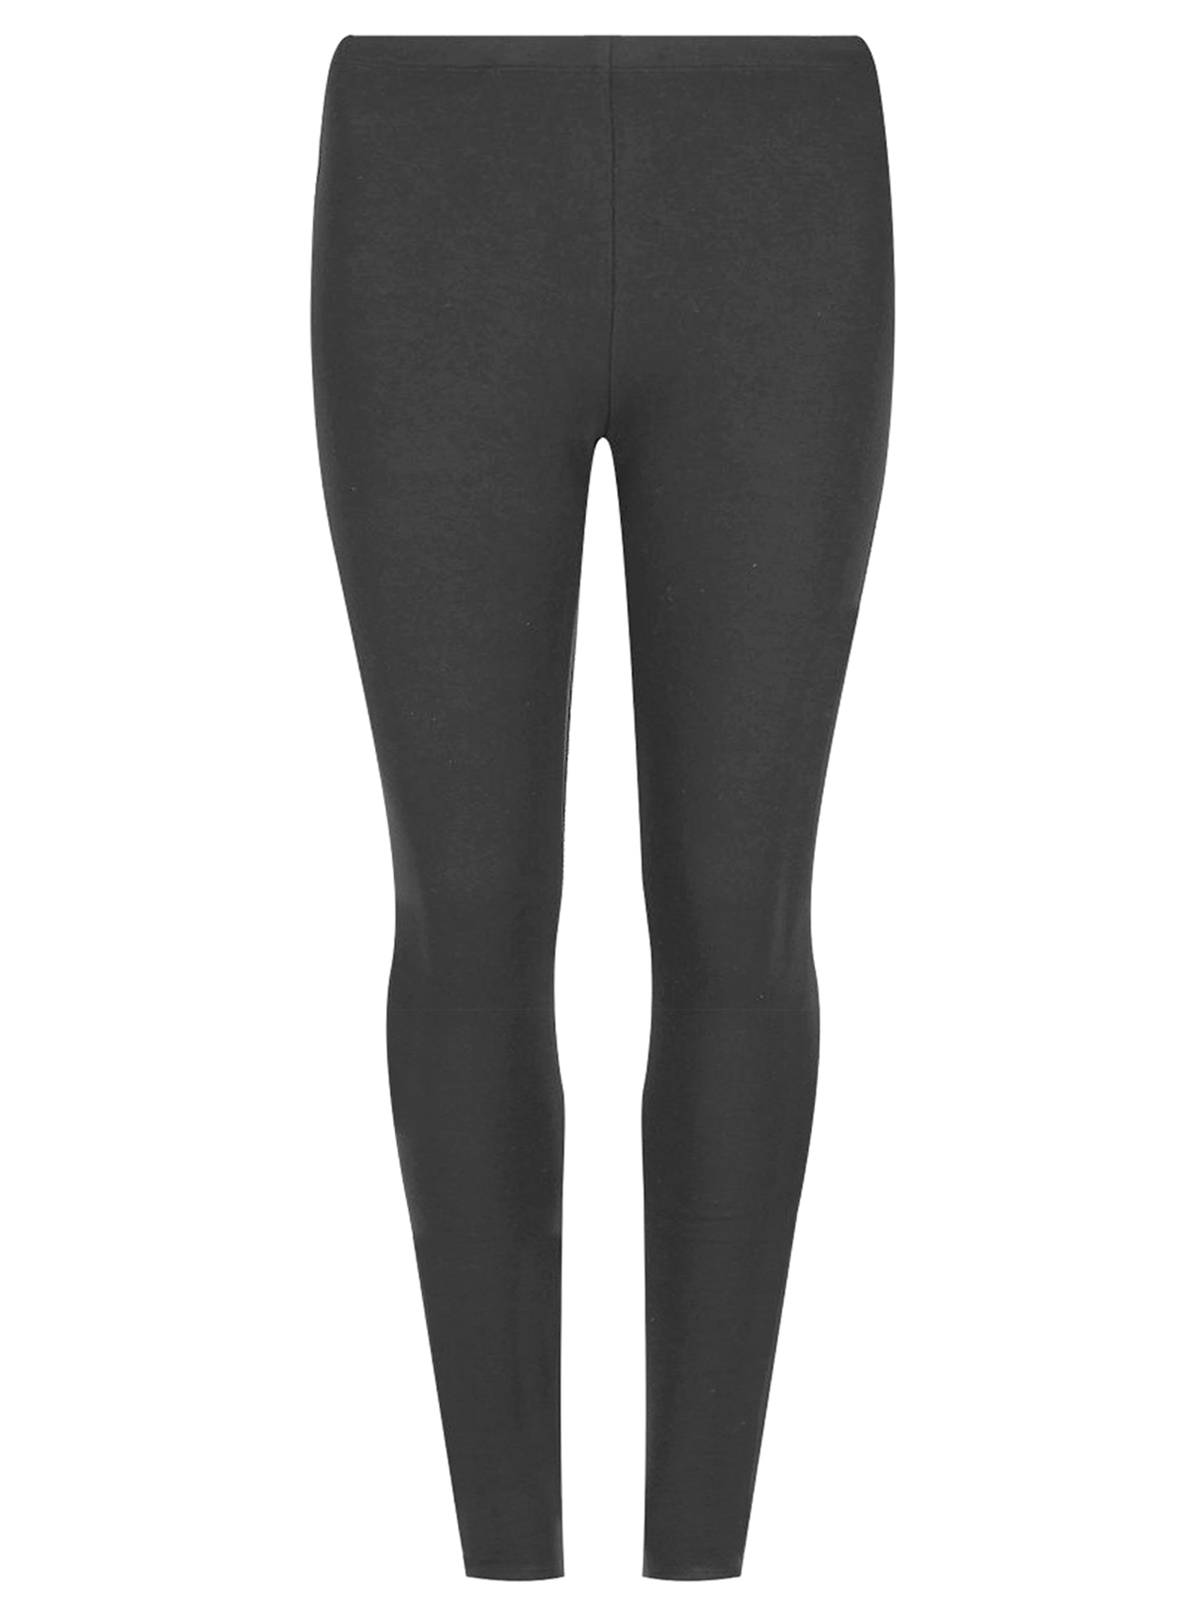 Marks and Spencer - - M&5 ASSORTED Heatgen Leggings - Size 8 to 16